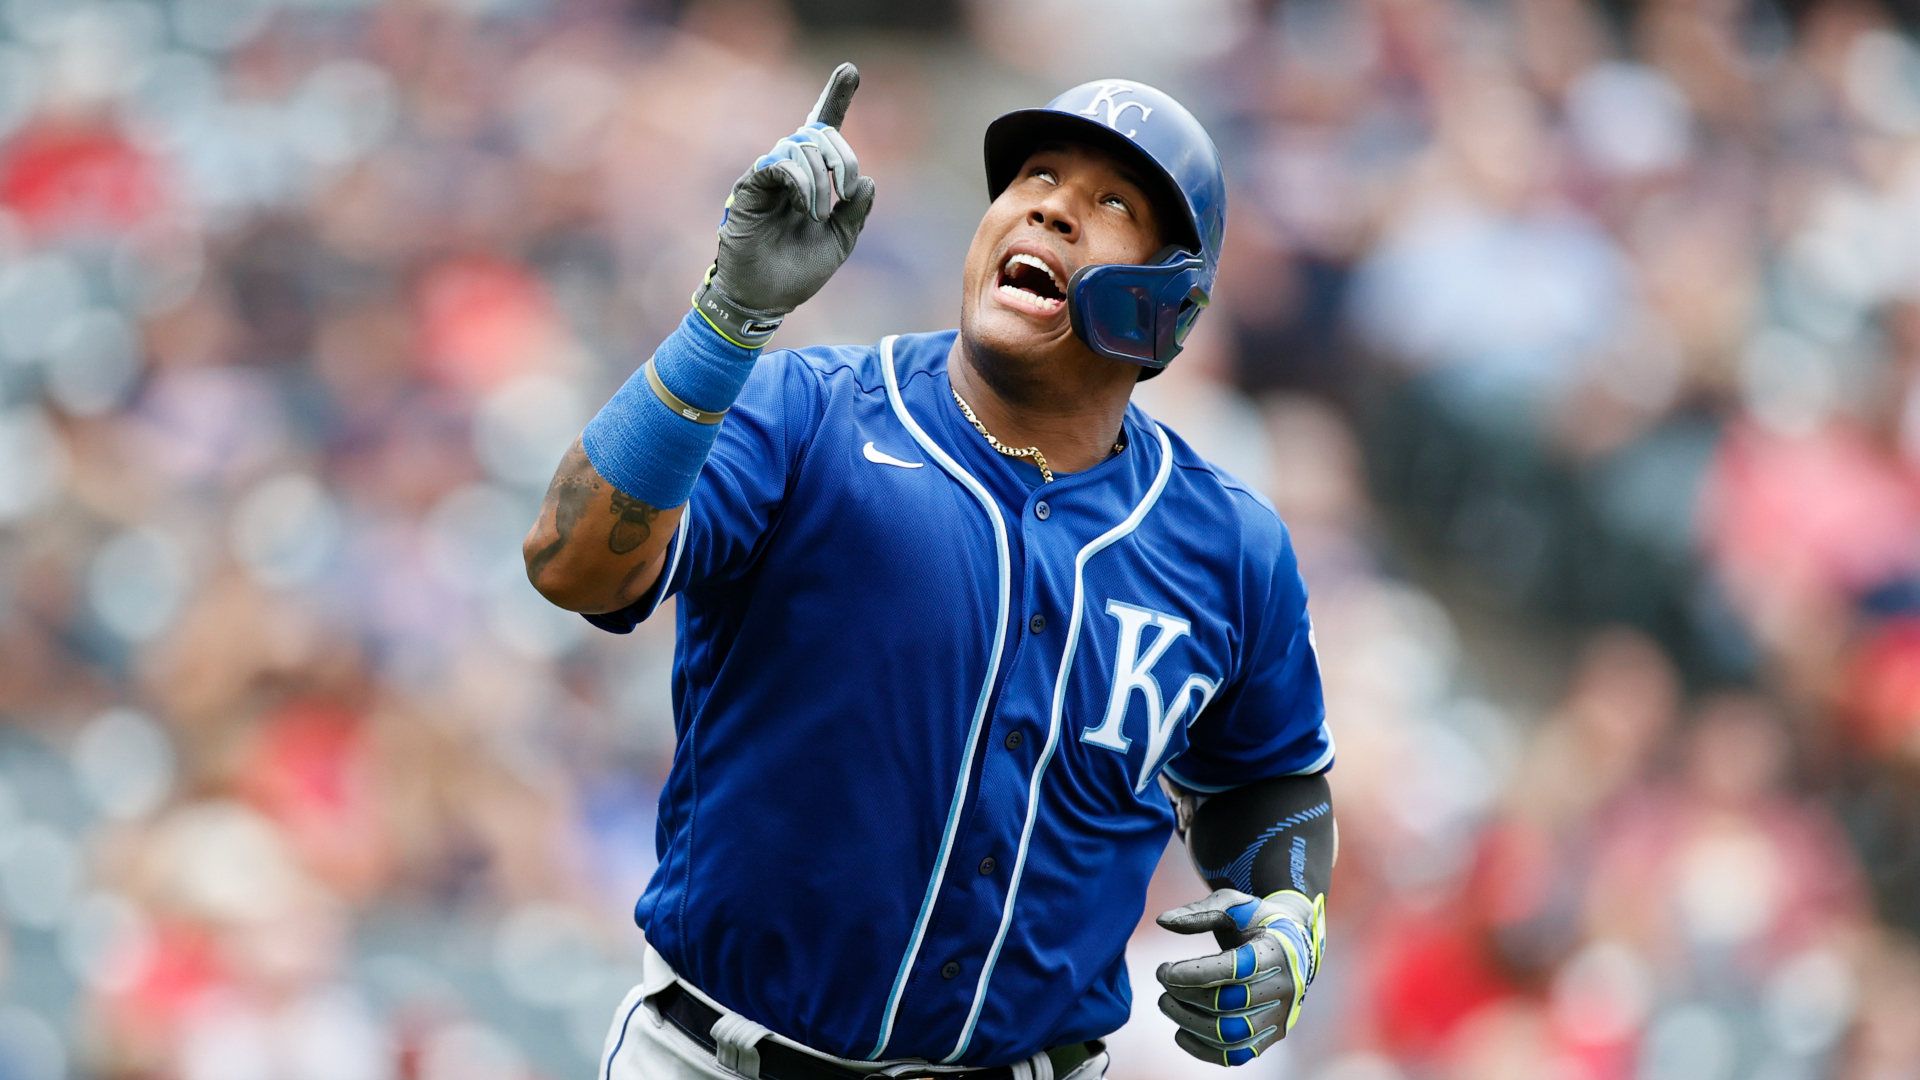 Royals' Salvador Perez breaks Johnny Bench's MLB record with 46th home run